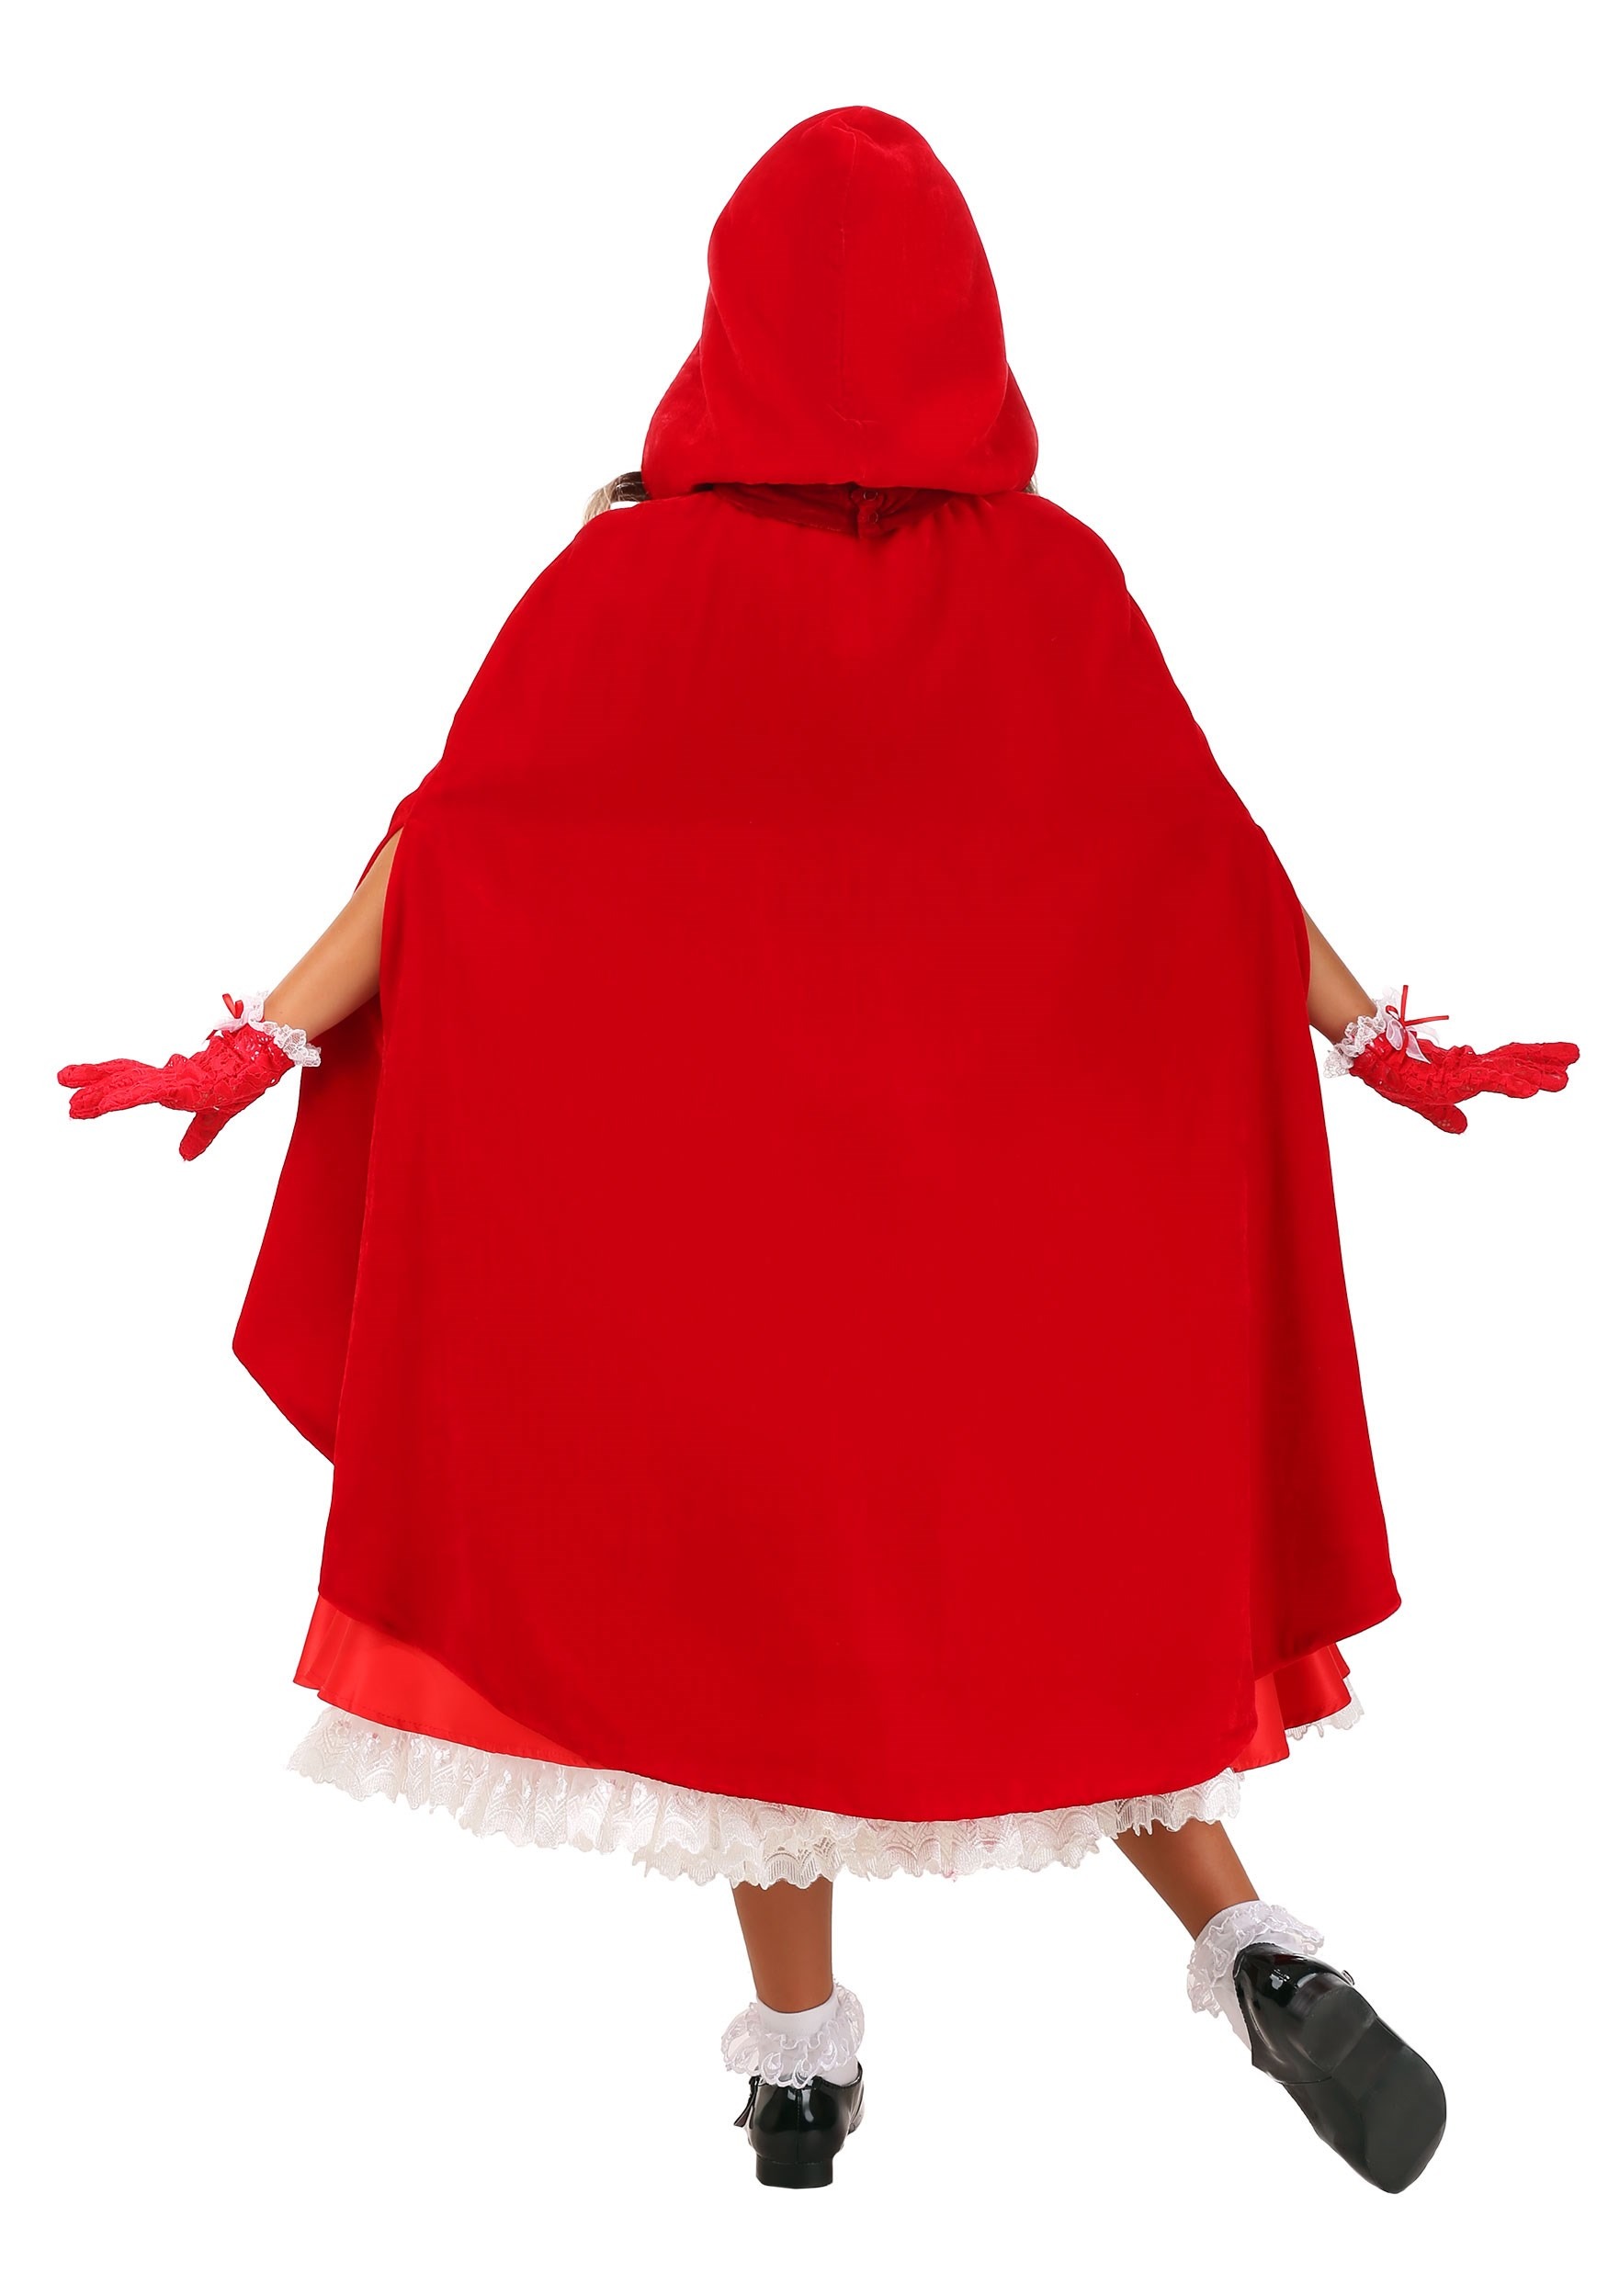 Premium Red Riding Hood Costume for Girls